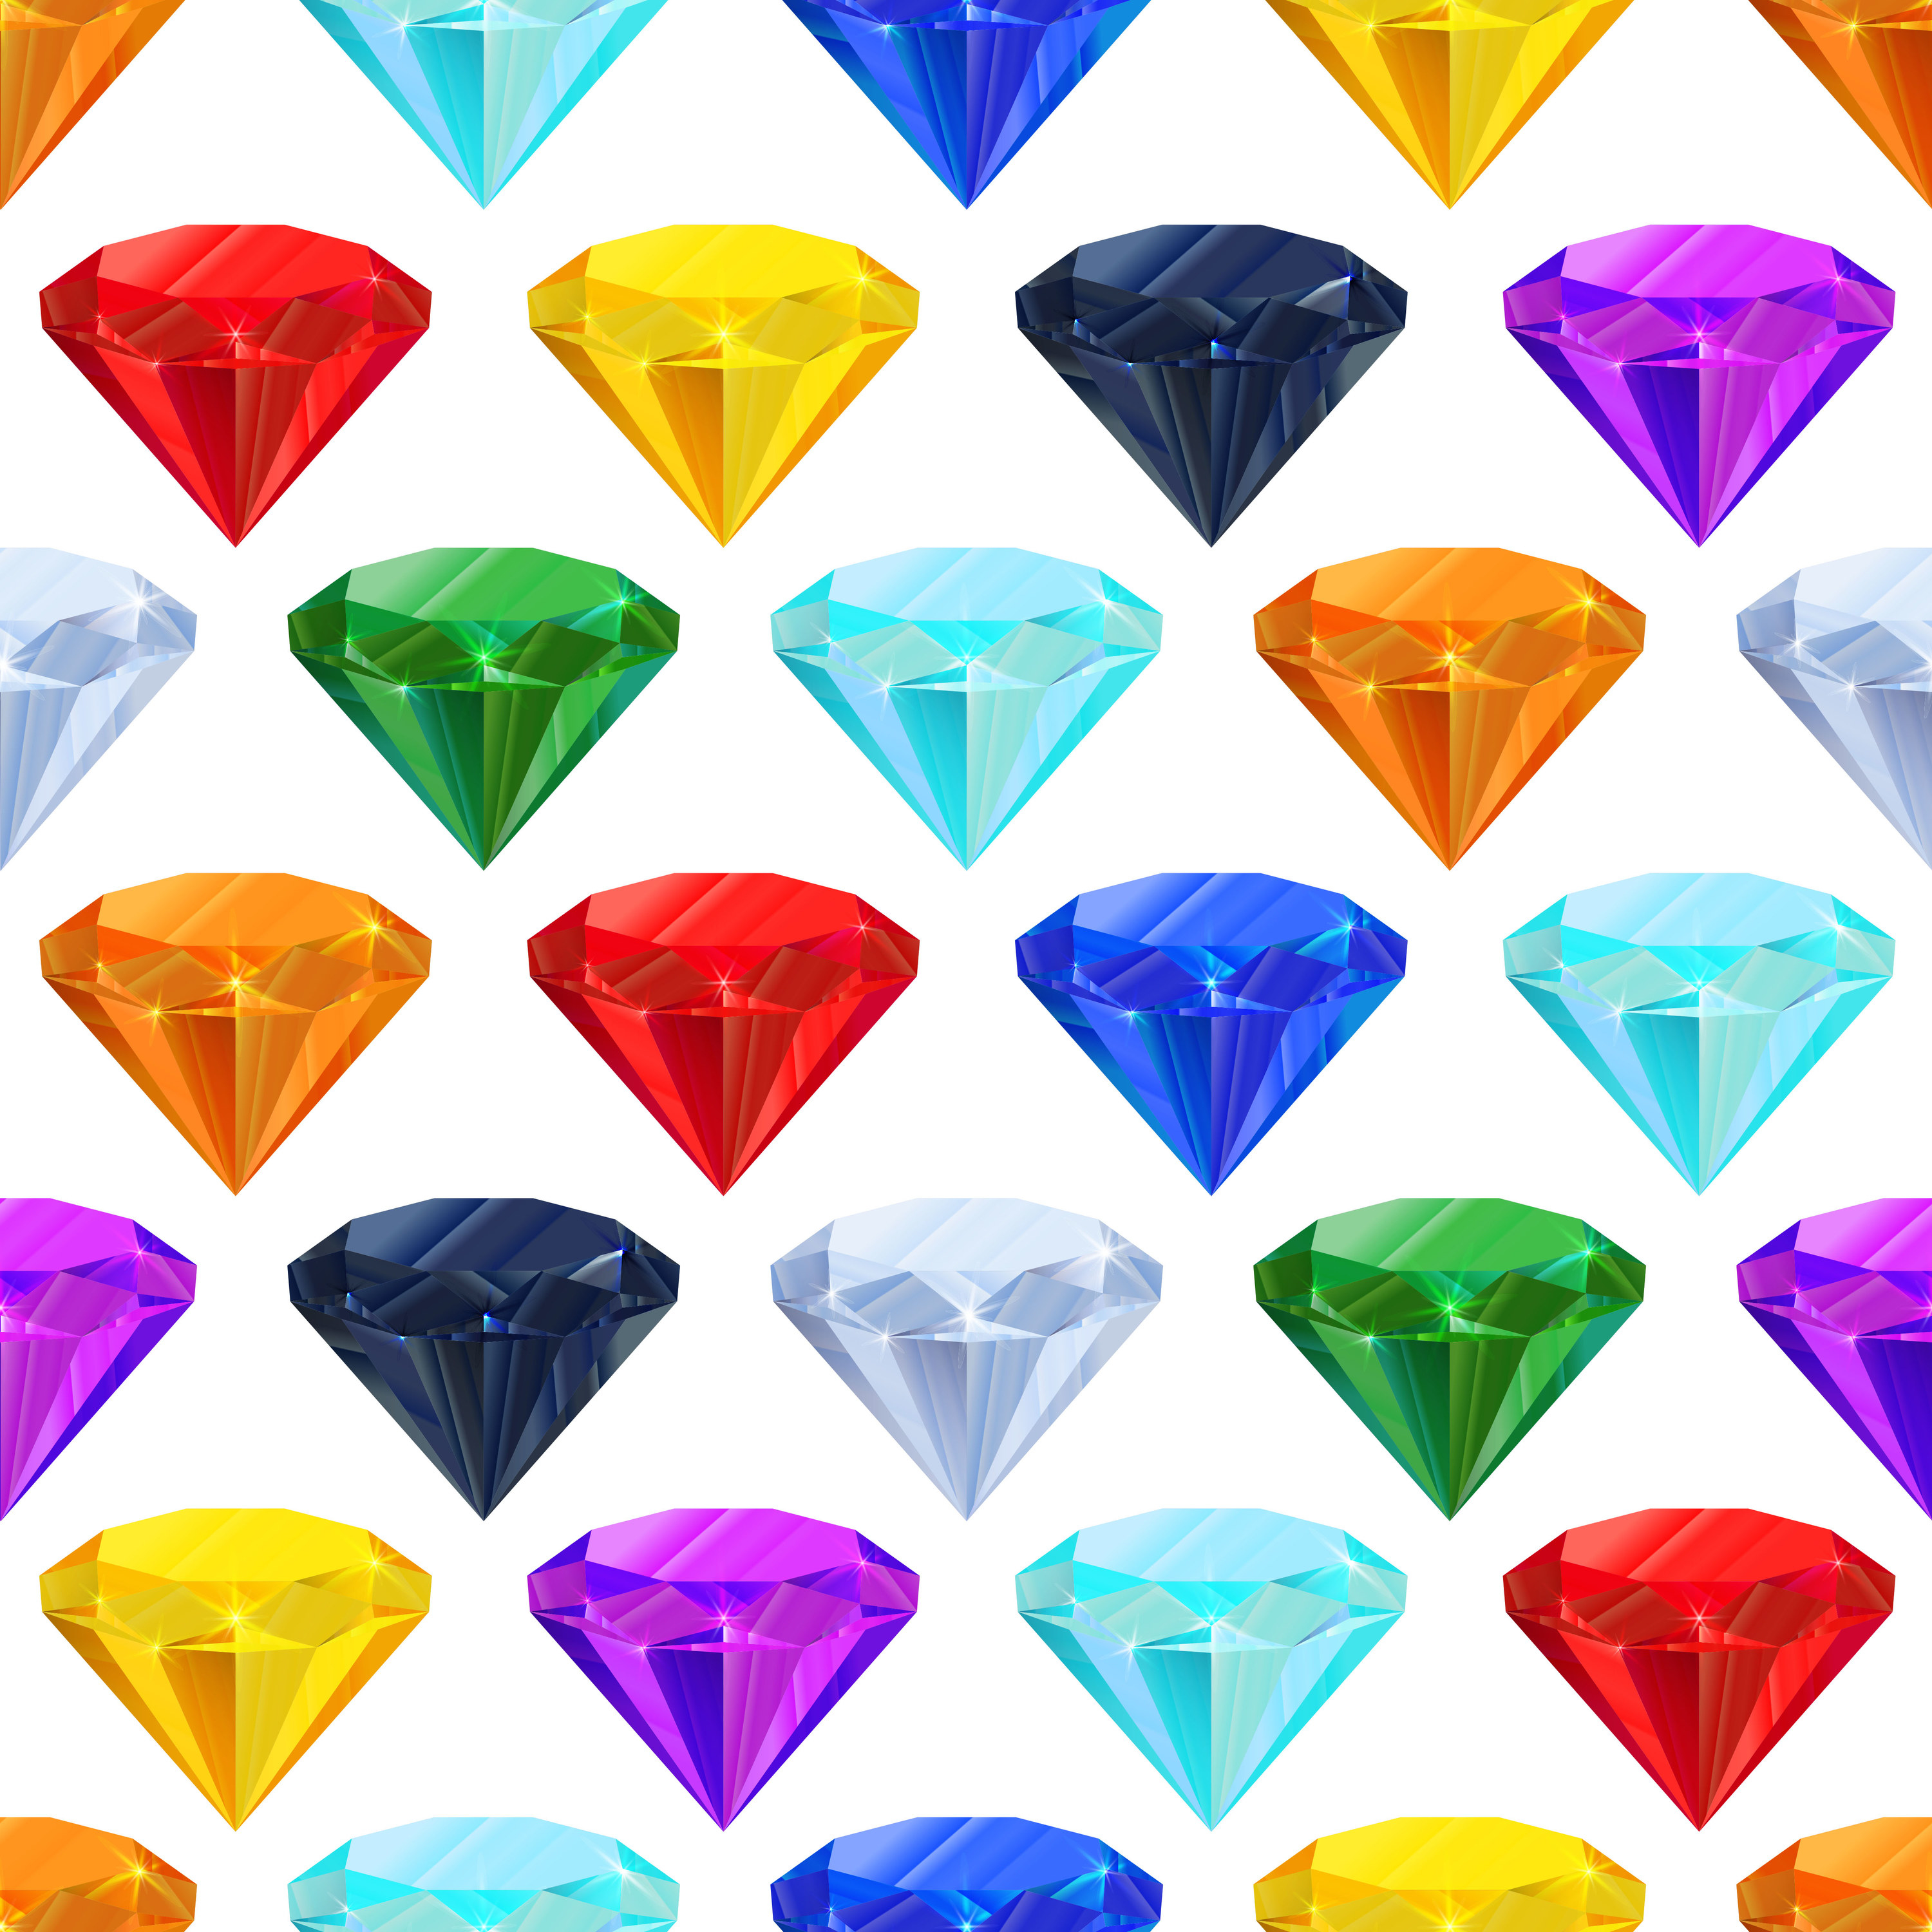 Multiple Chaos Emeralds from the &quot;Sonic&quot; franchise